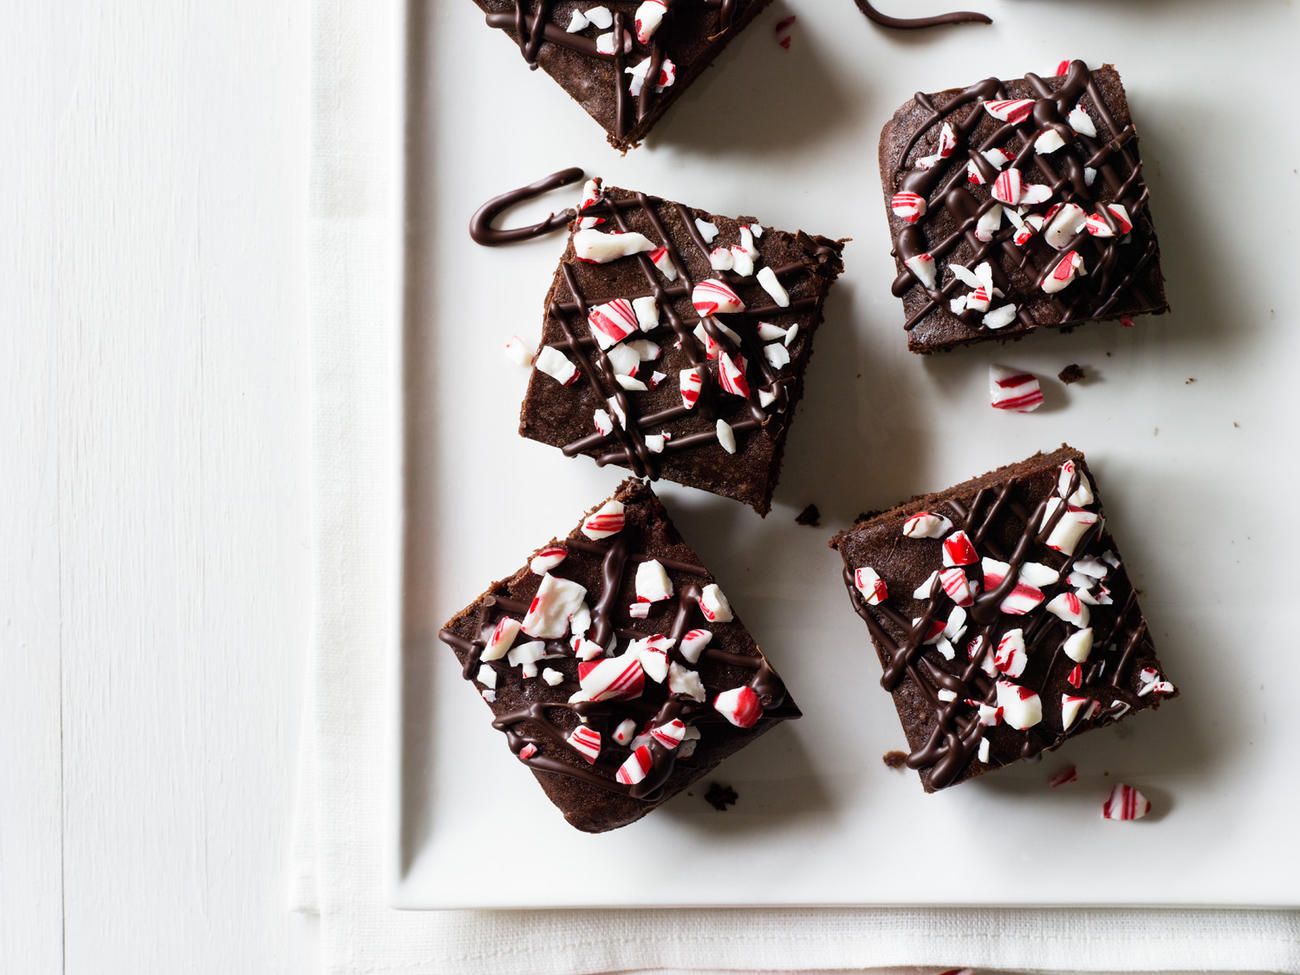 25 Delectable Holiday Desserts You’ll Love Making (and Eating)